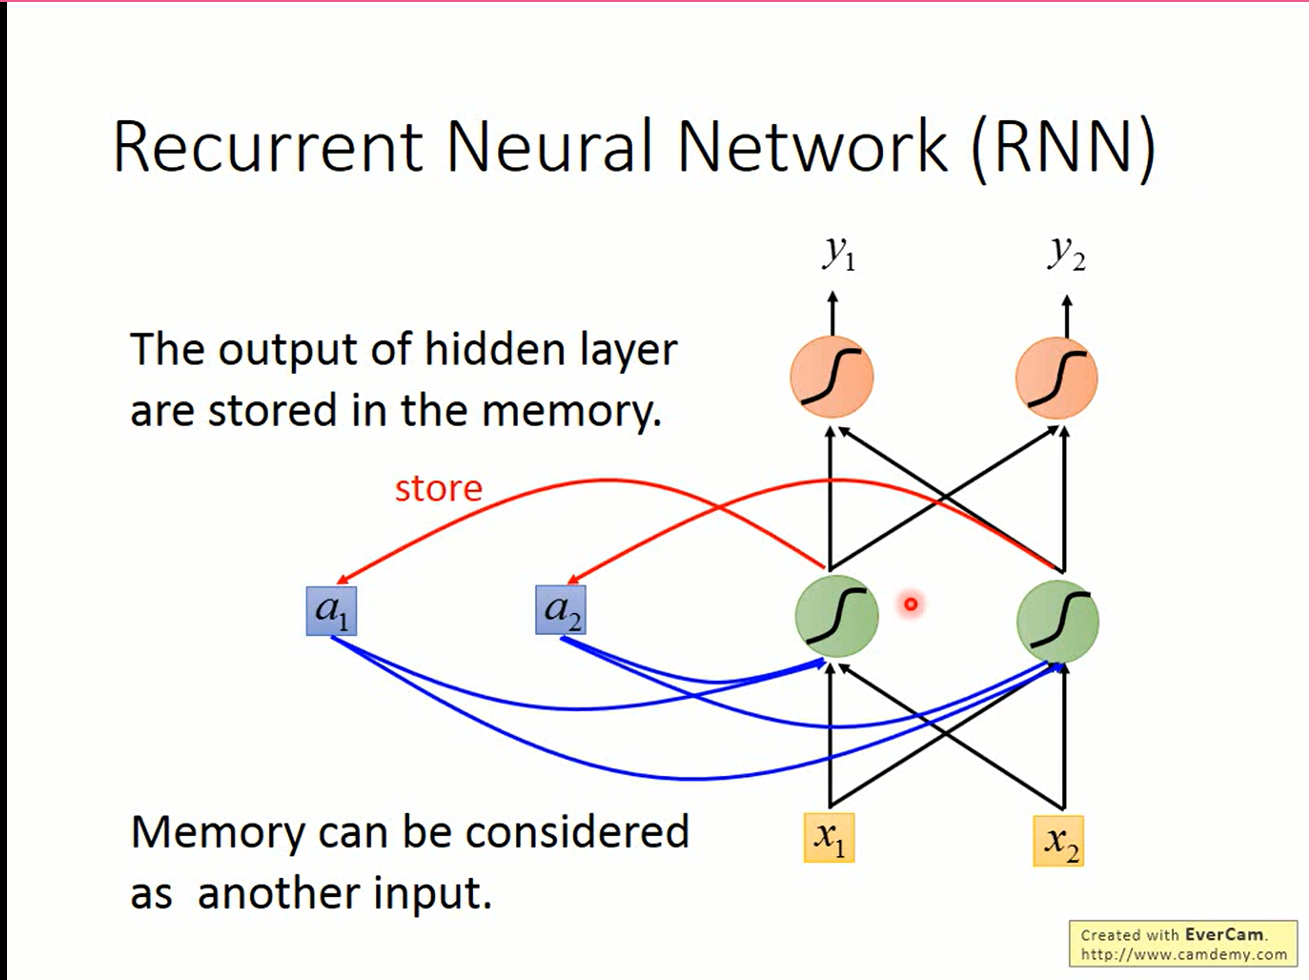 Network with memory